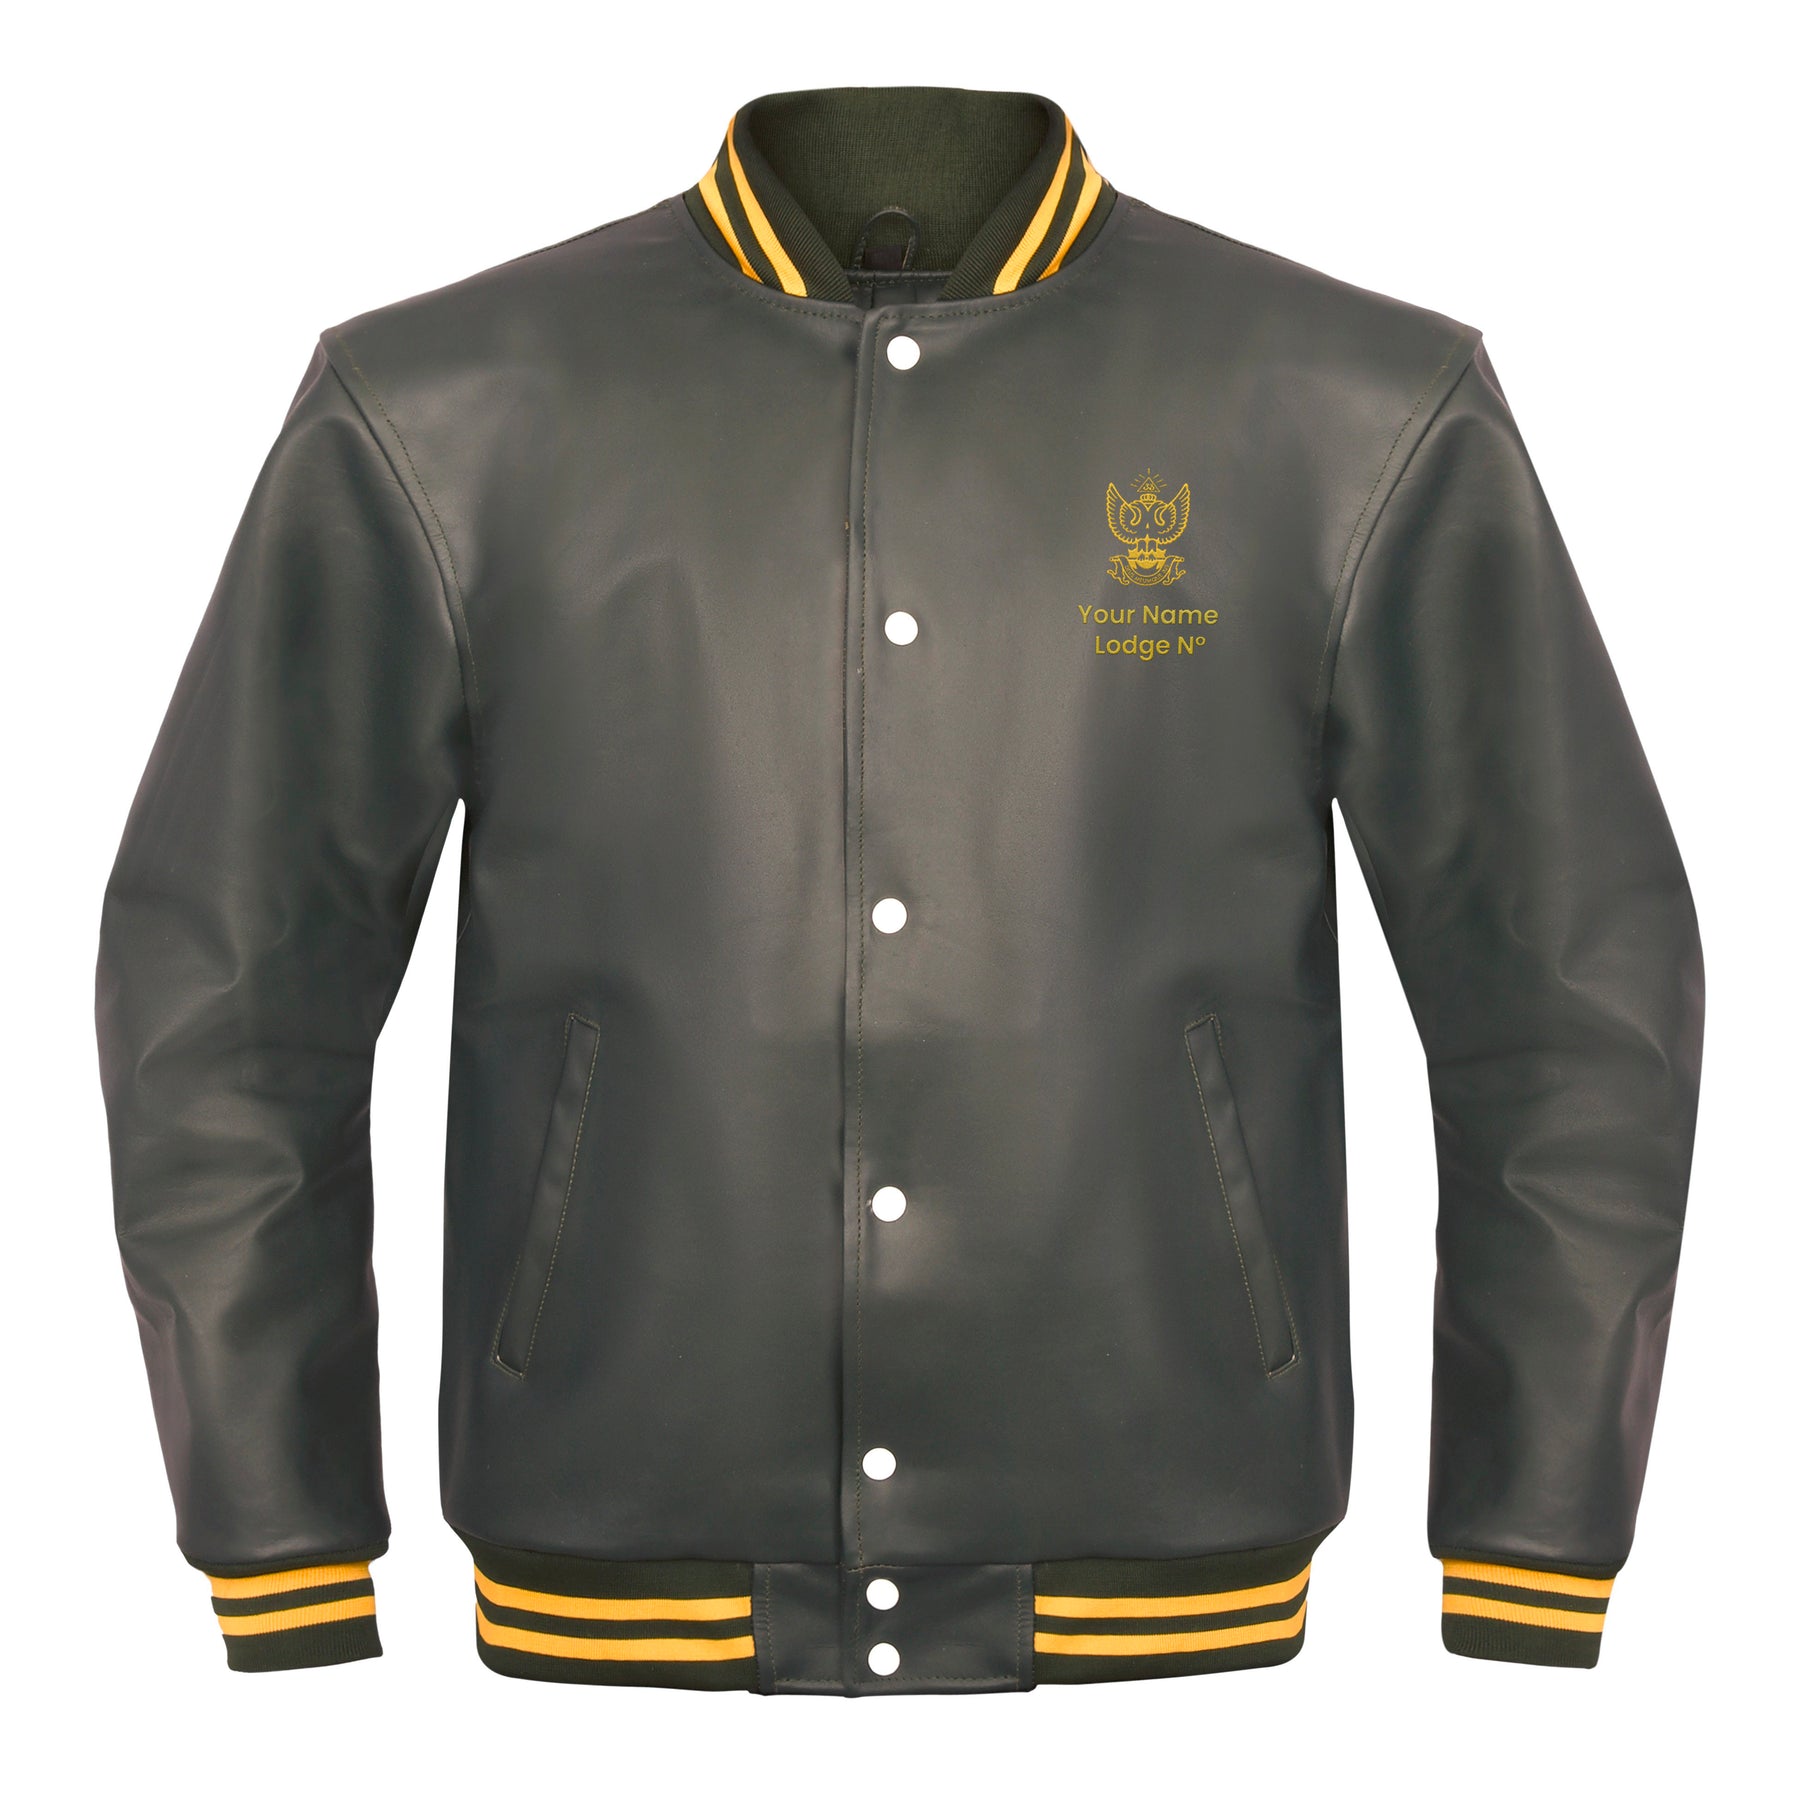 33rd Degree Scottish Rite Jacket - Wings Up Leather With Customizable Gold Embroidery - Bricks Masons